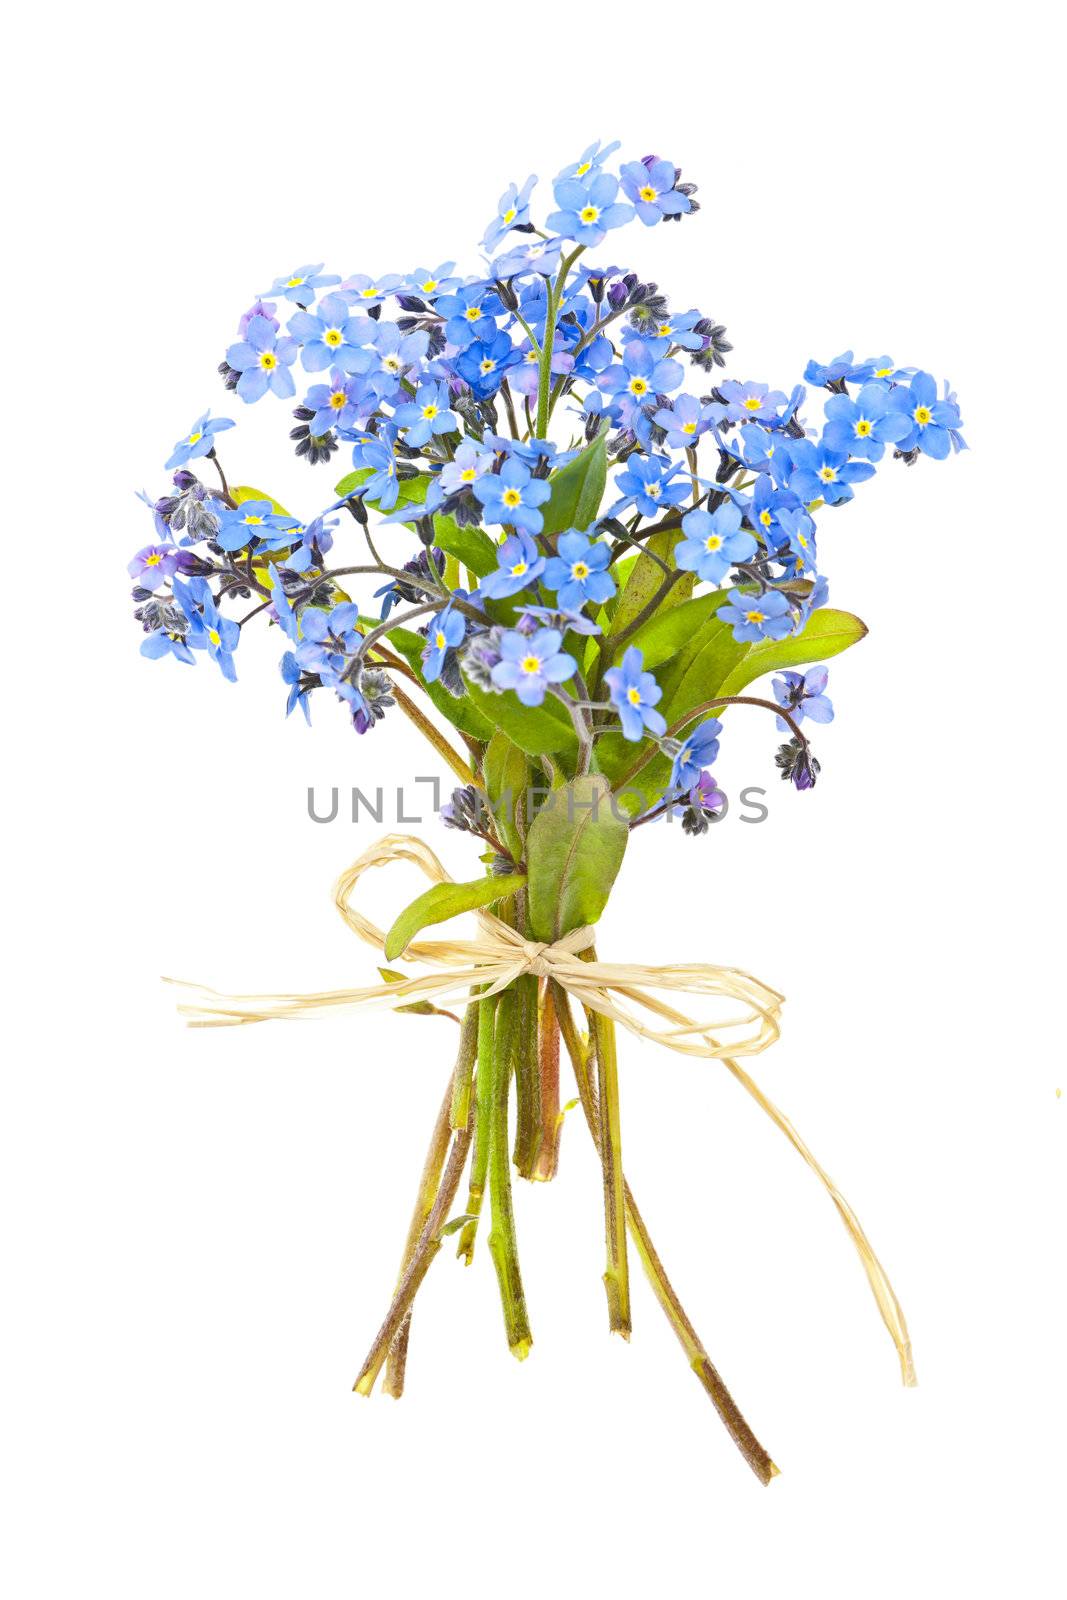 Bouquet of forget-me-nots by elenathewise